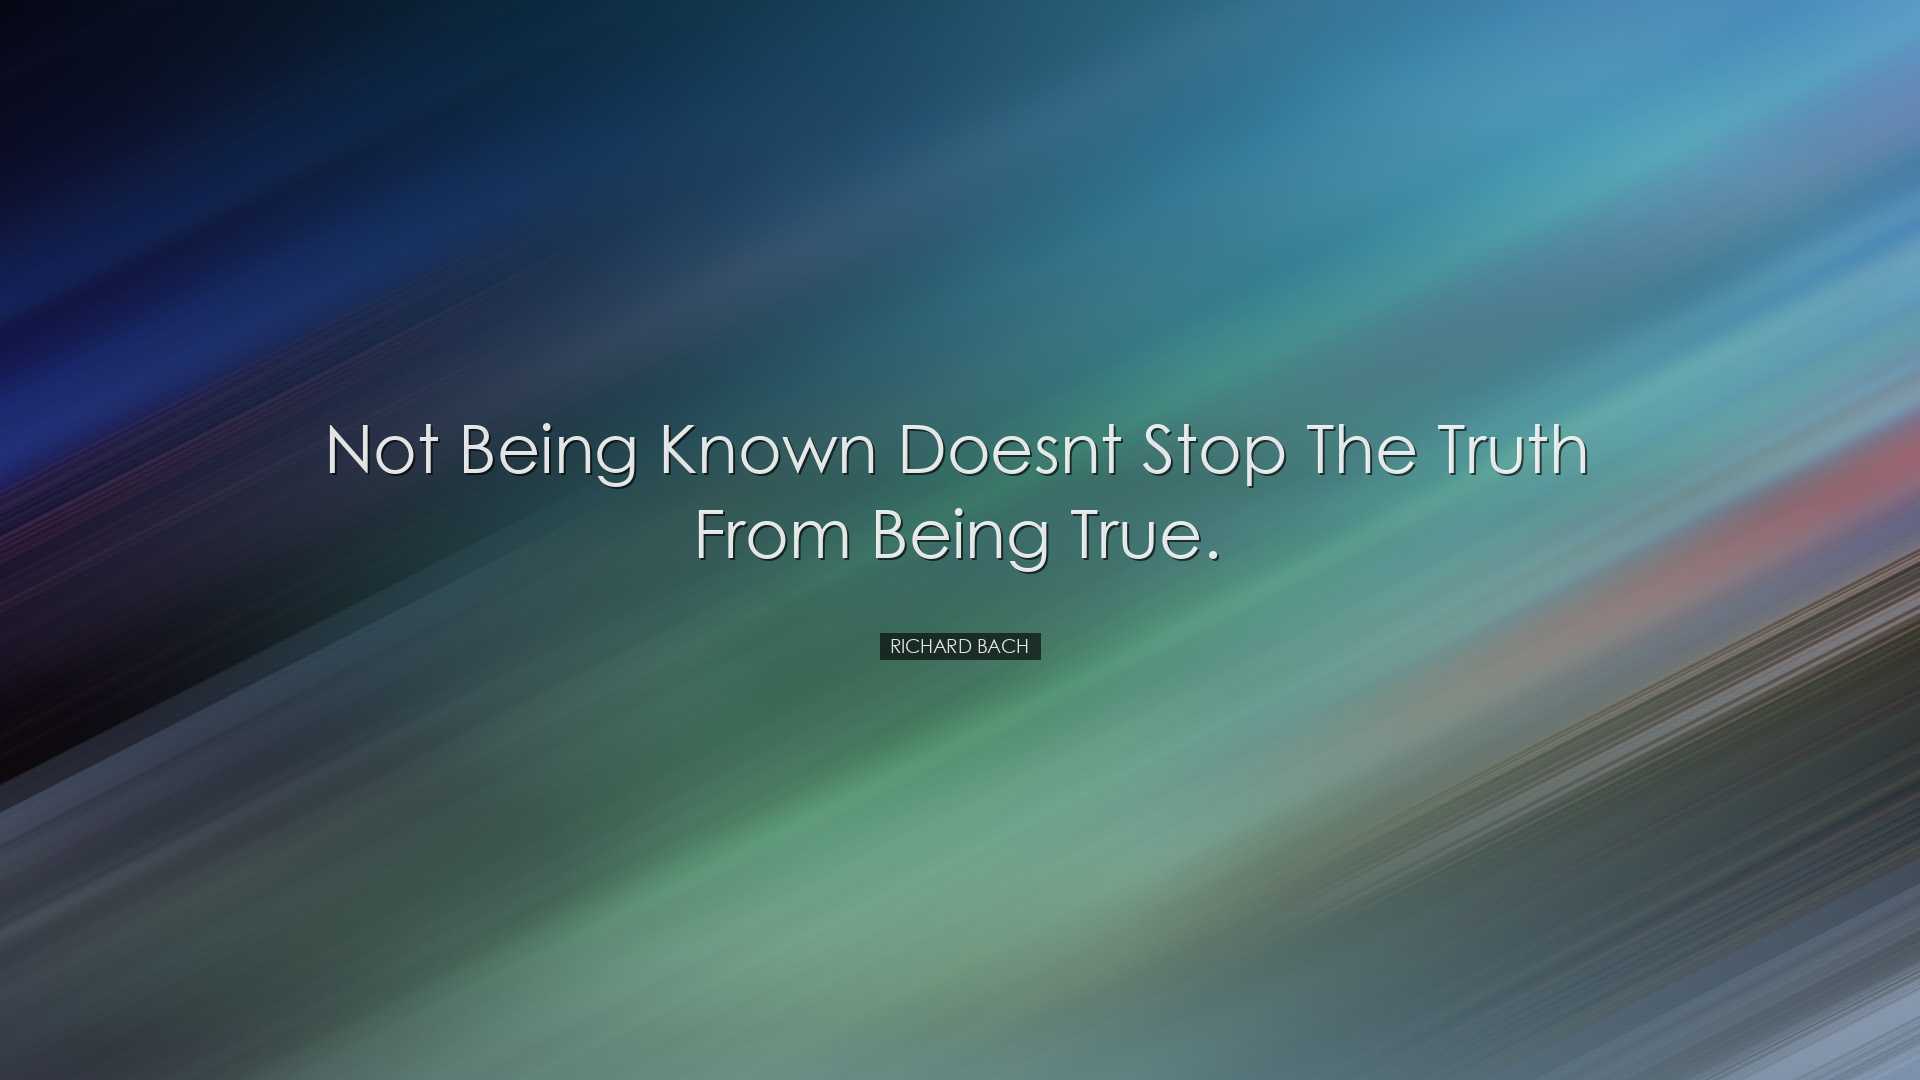 Not being known doesnt stop the truth from being true. - Richard B